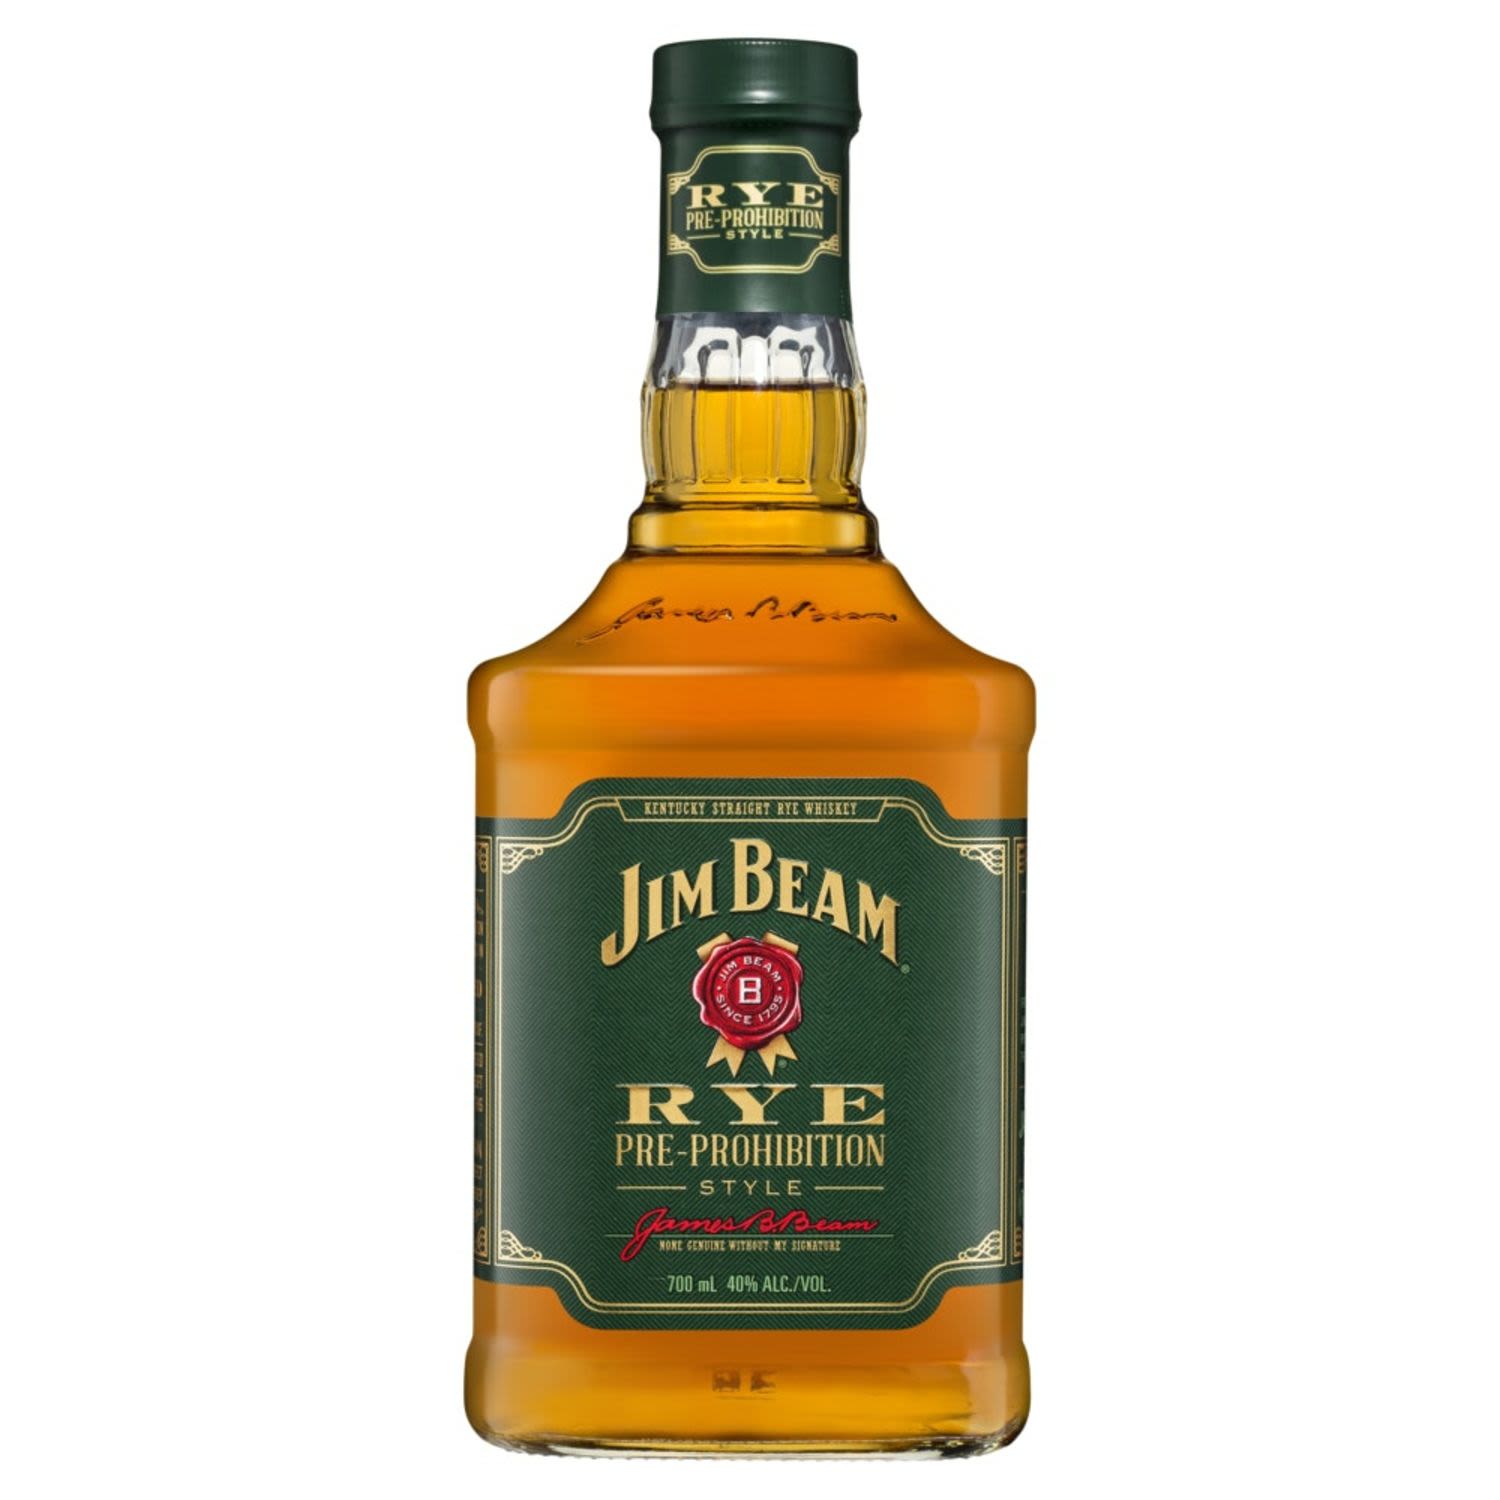 Bold. Spicy. Classic. Our old-school Jim Beam Rye recipe is marked by a warm, spicy kick and a bite of black pepper, all rounded out by hints of vanilla and oak. Add it to classic and contemporary cocktails alike for an unmistakable pre-Prohibition flavour that’s sure to take you back.<br /> <br />Alcohol Volume: 40.00%<br /><br />Pack Format: Bottle<br /><br />Standard Drinks: 22.3</br /><br />Pack Type: Bottle<br /><br />Country of Origin: USA<br />